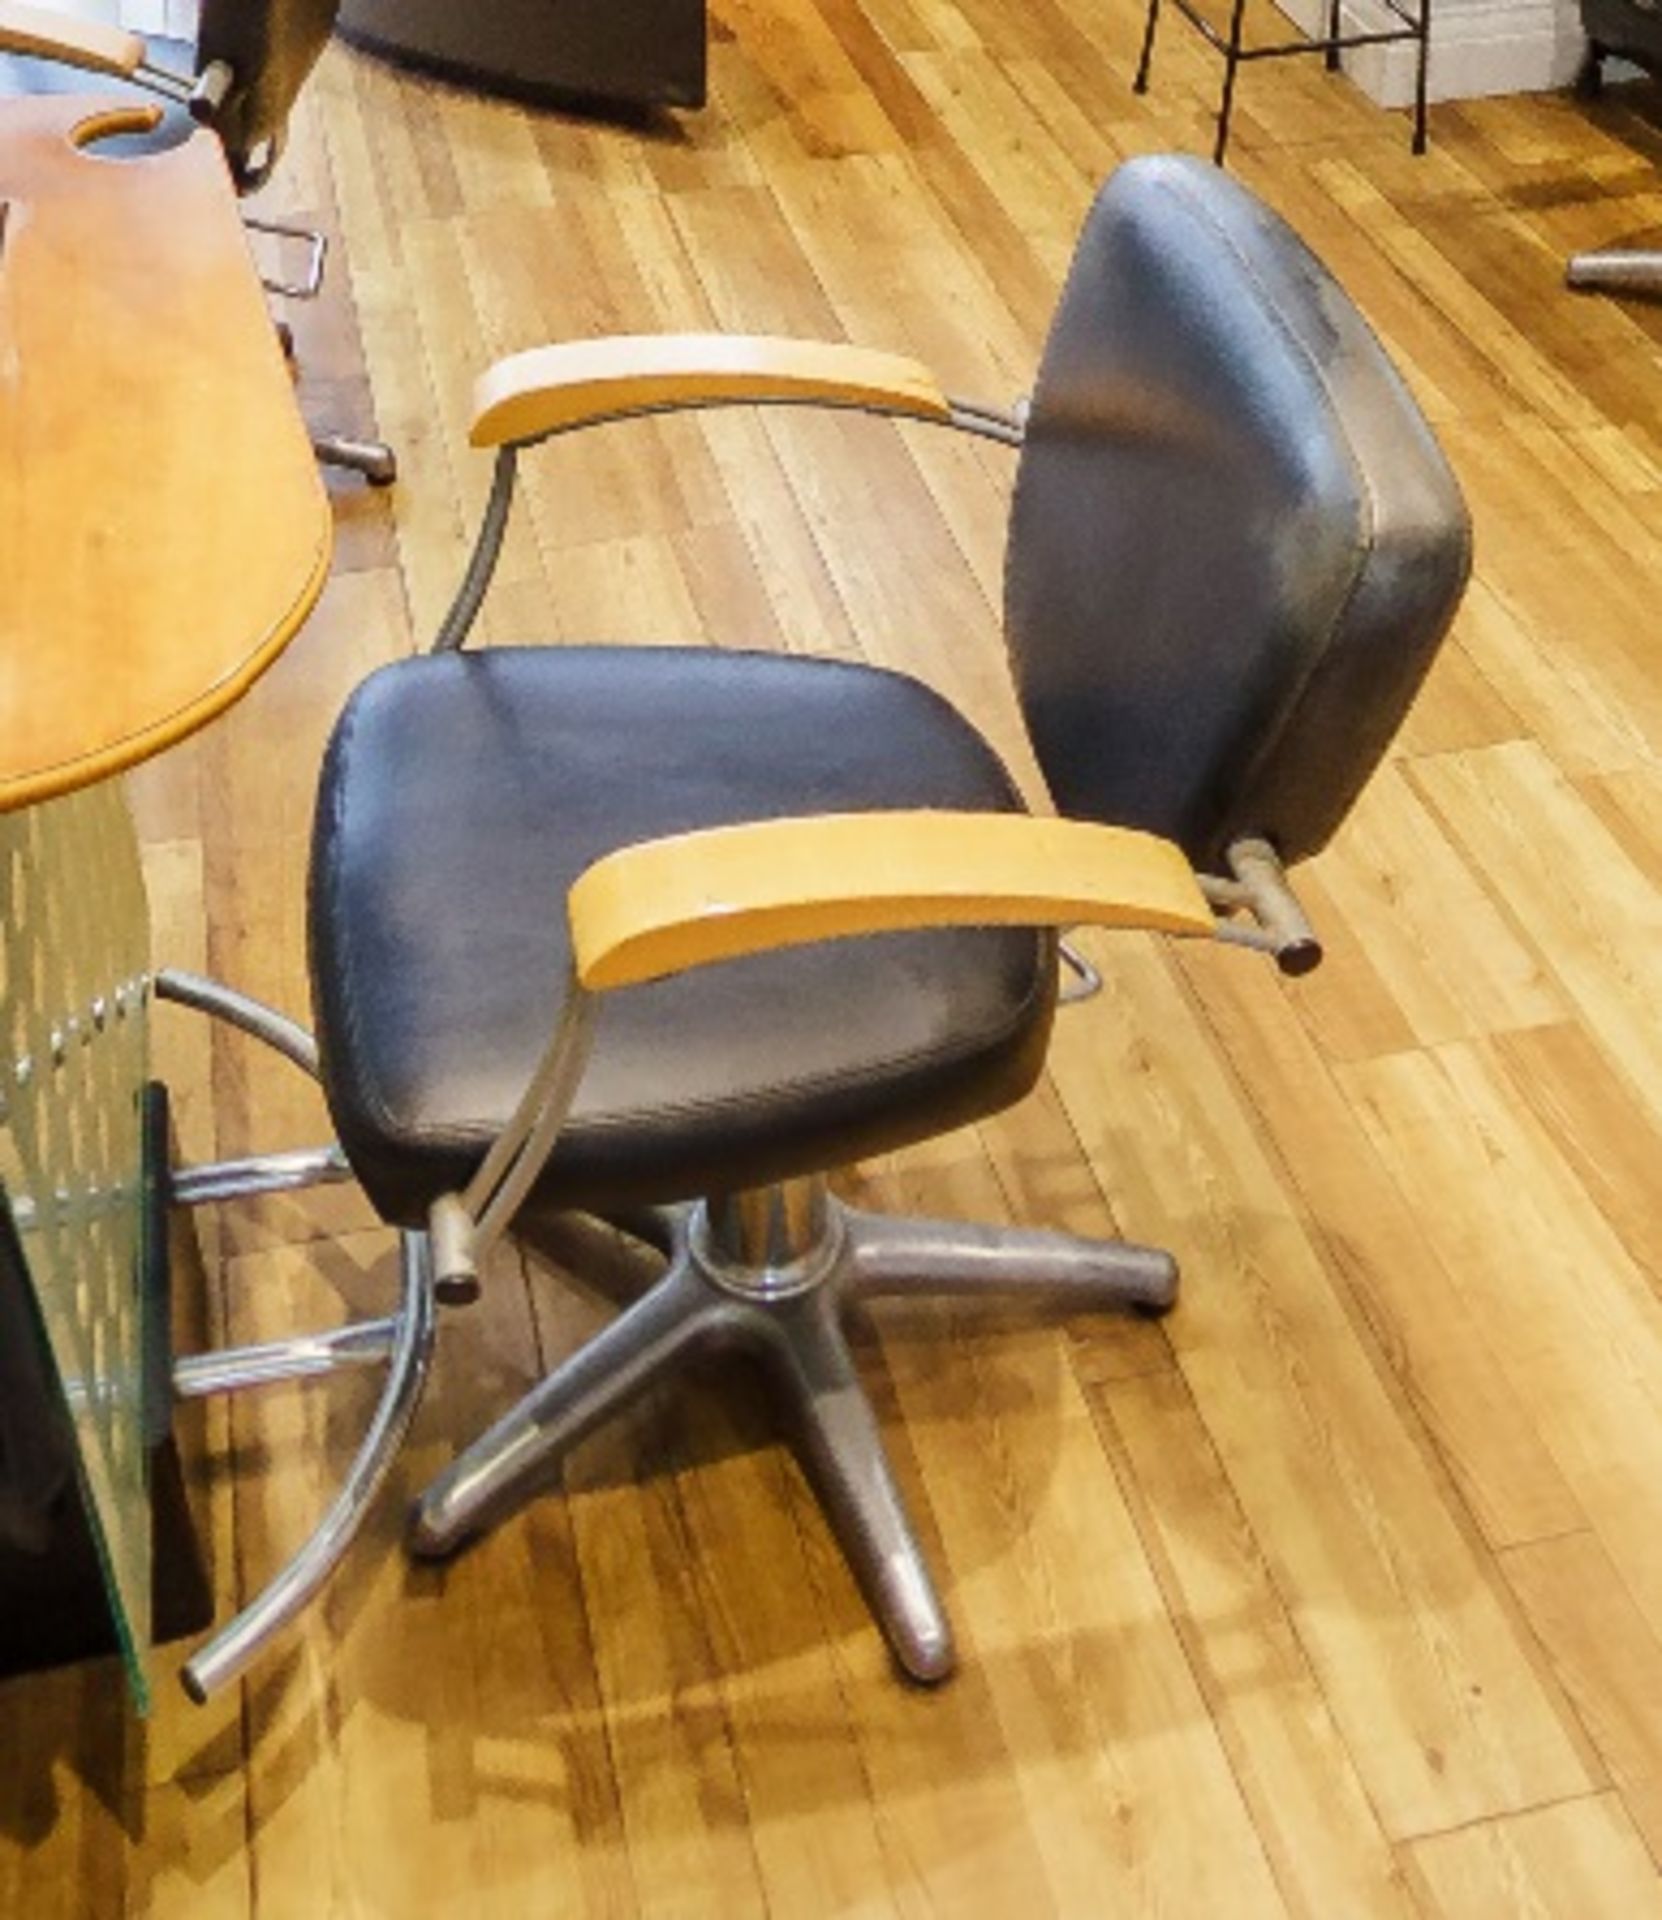 1 x Adjustable Black Hydraulic Barber Hairdressing Chair - Recently Removed From A Boutique Hair - Image 10 of 10